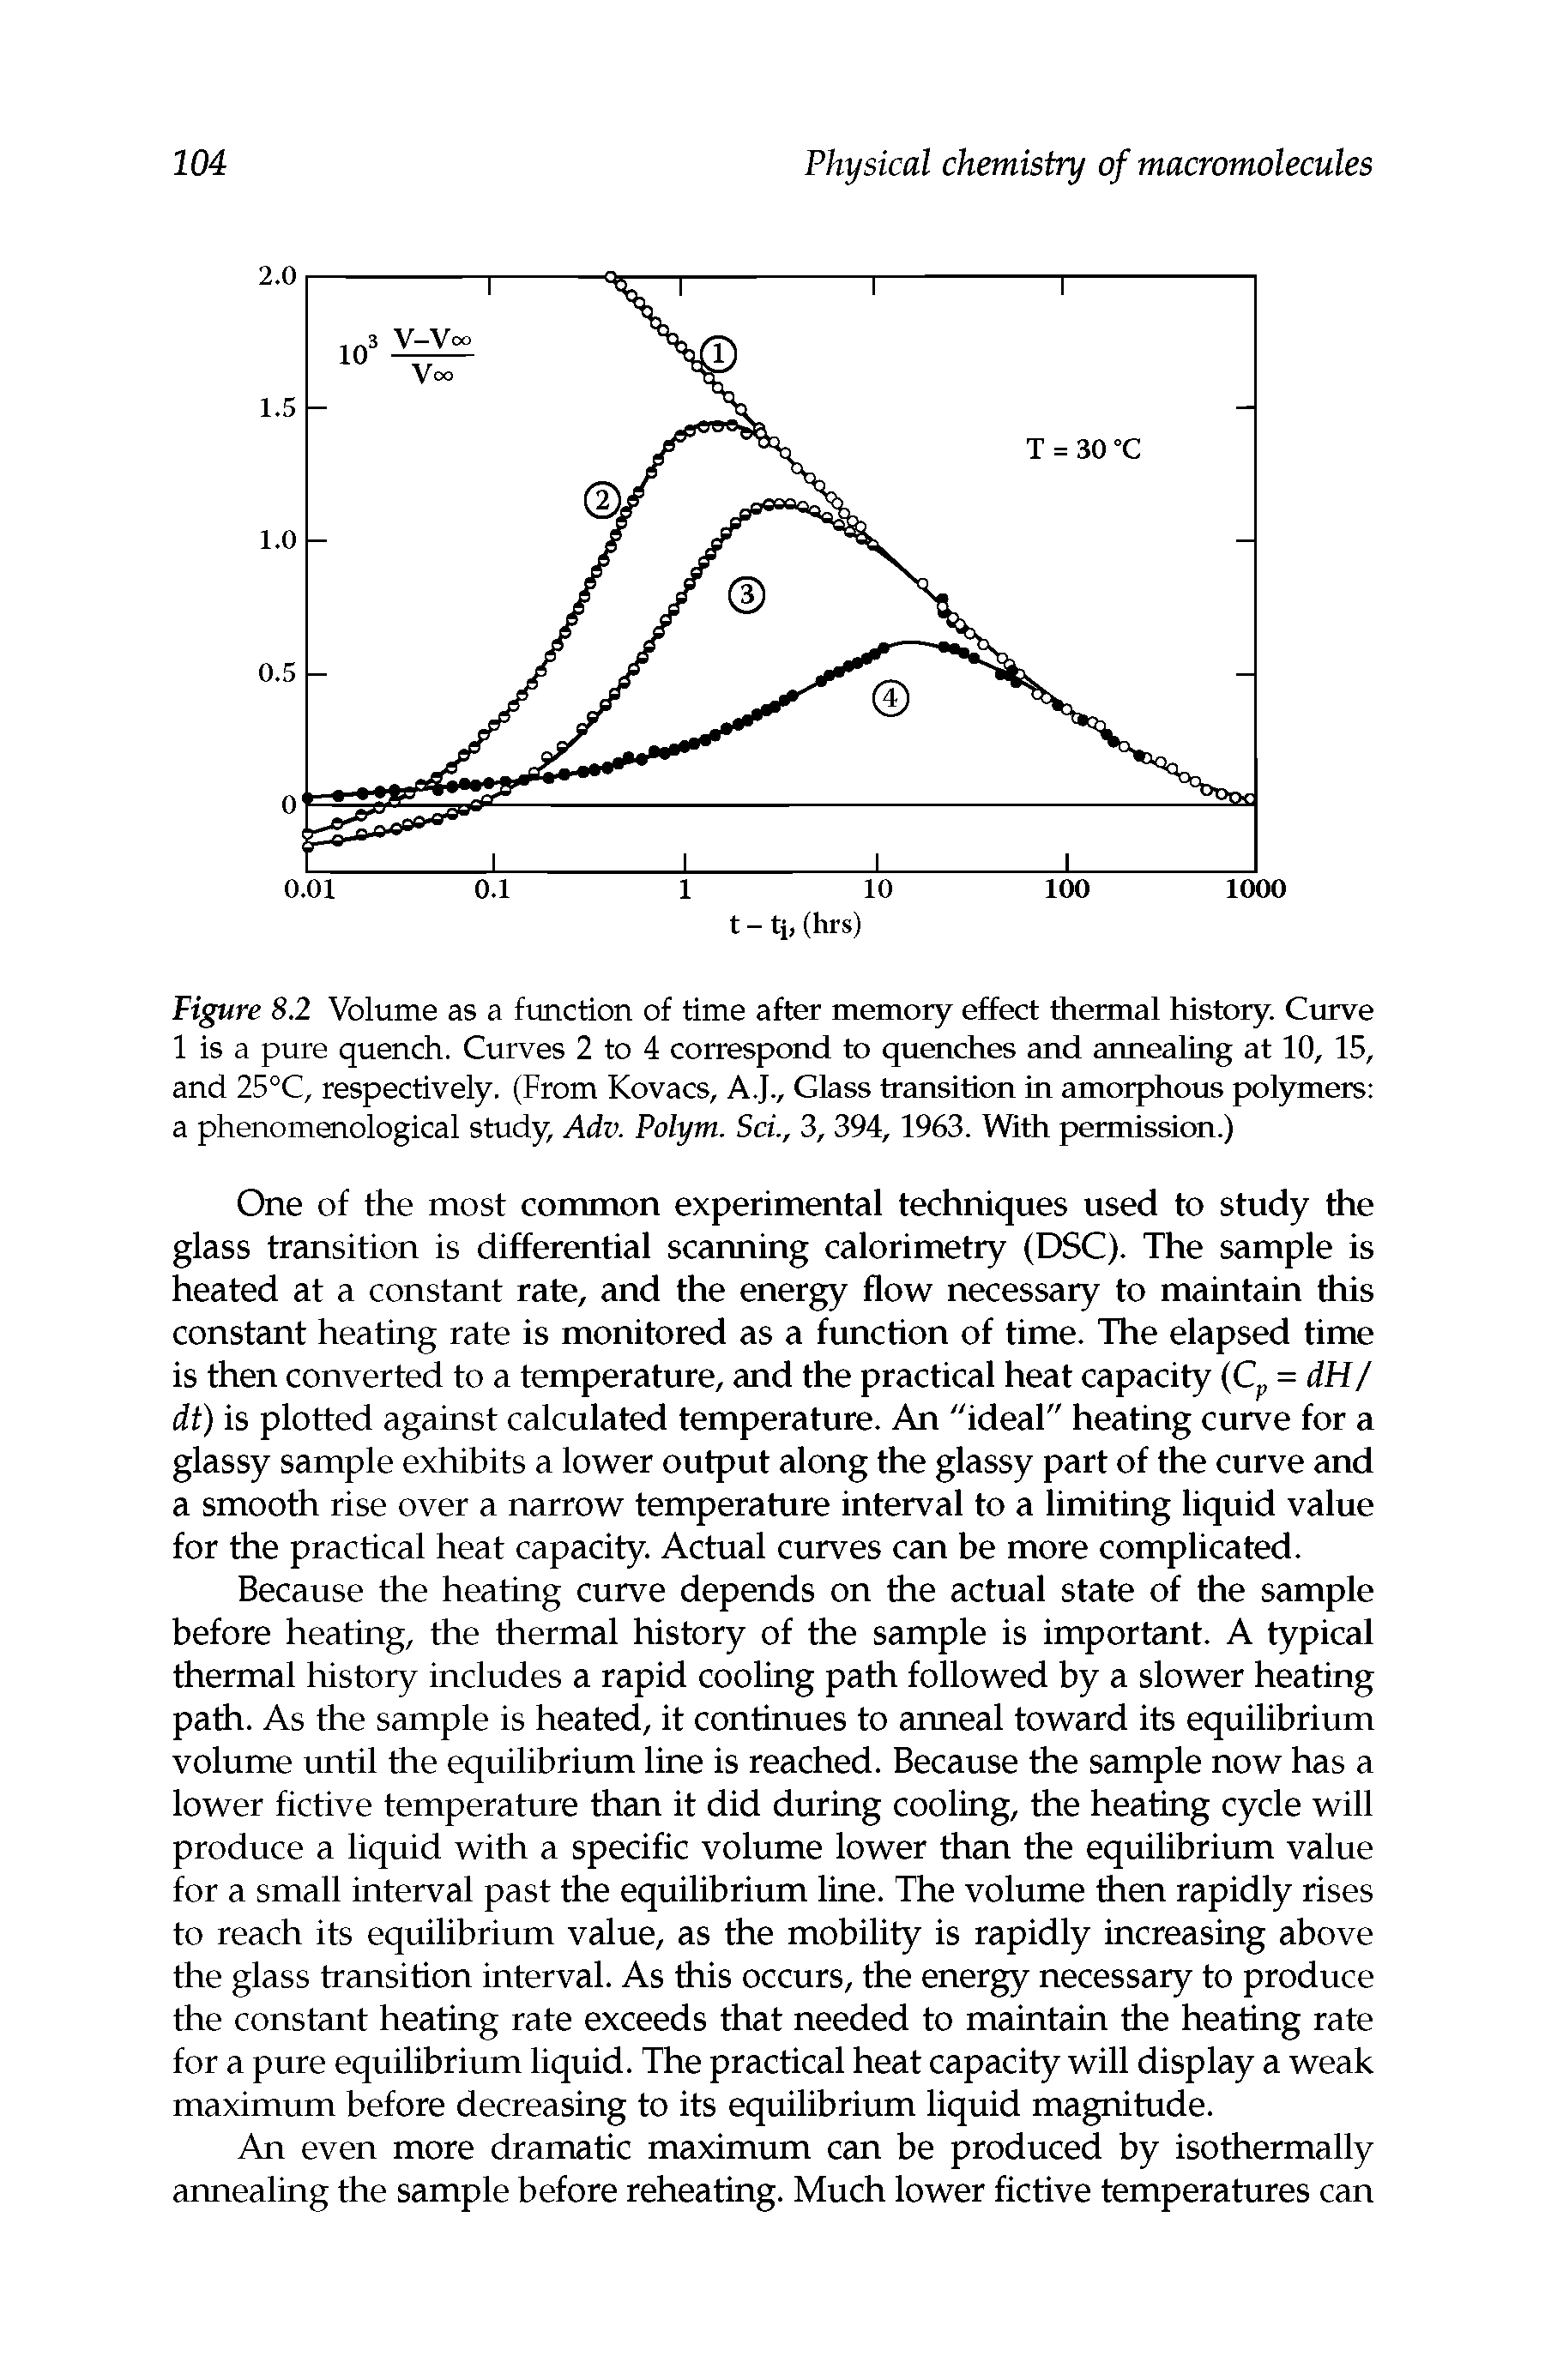 Figure 8.2 Volume as a function of time after memory effect thermal history. Curve 1 is a pure quench. Curves 2 to 4 correspond to quenches and annealing at 10, 15, and 25°C, respectively. (From Kovacs, A.J., Glass transition in amorphous polymers a phenomenological study, Adv. Polym. Sci., 3, 394,1963. With permission.)...